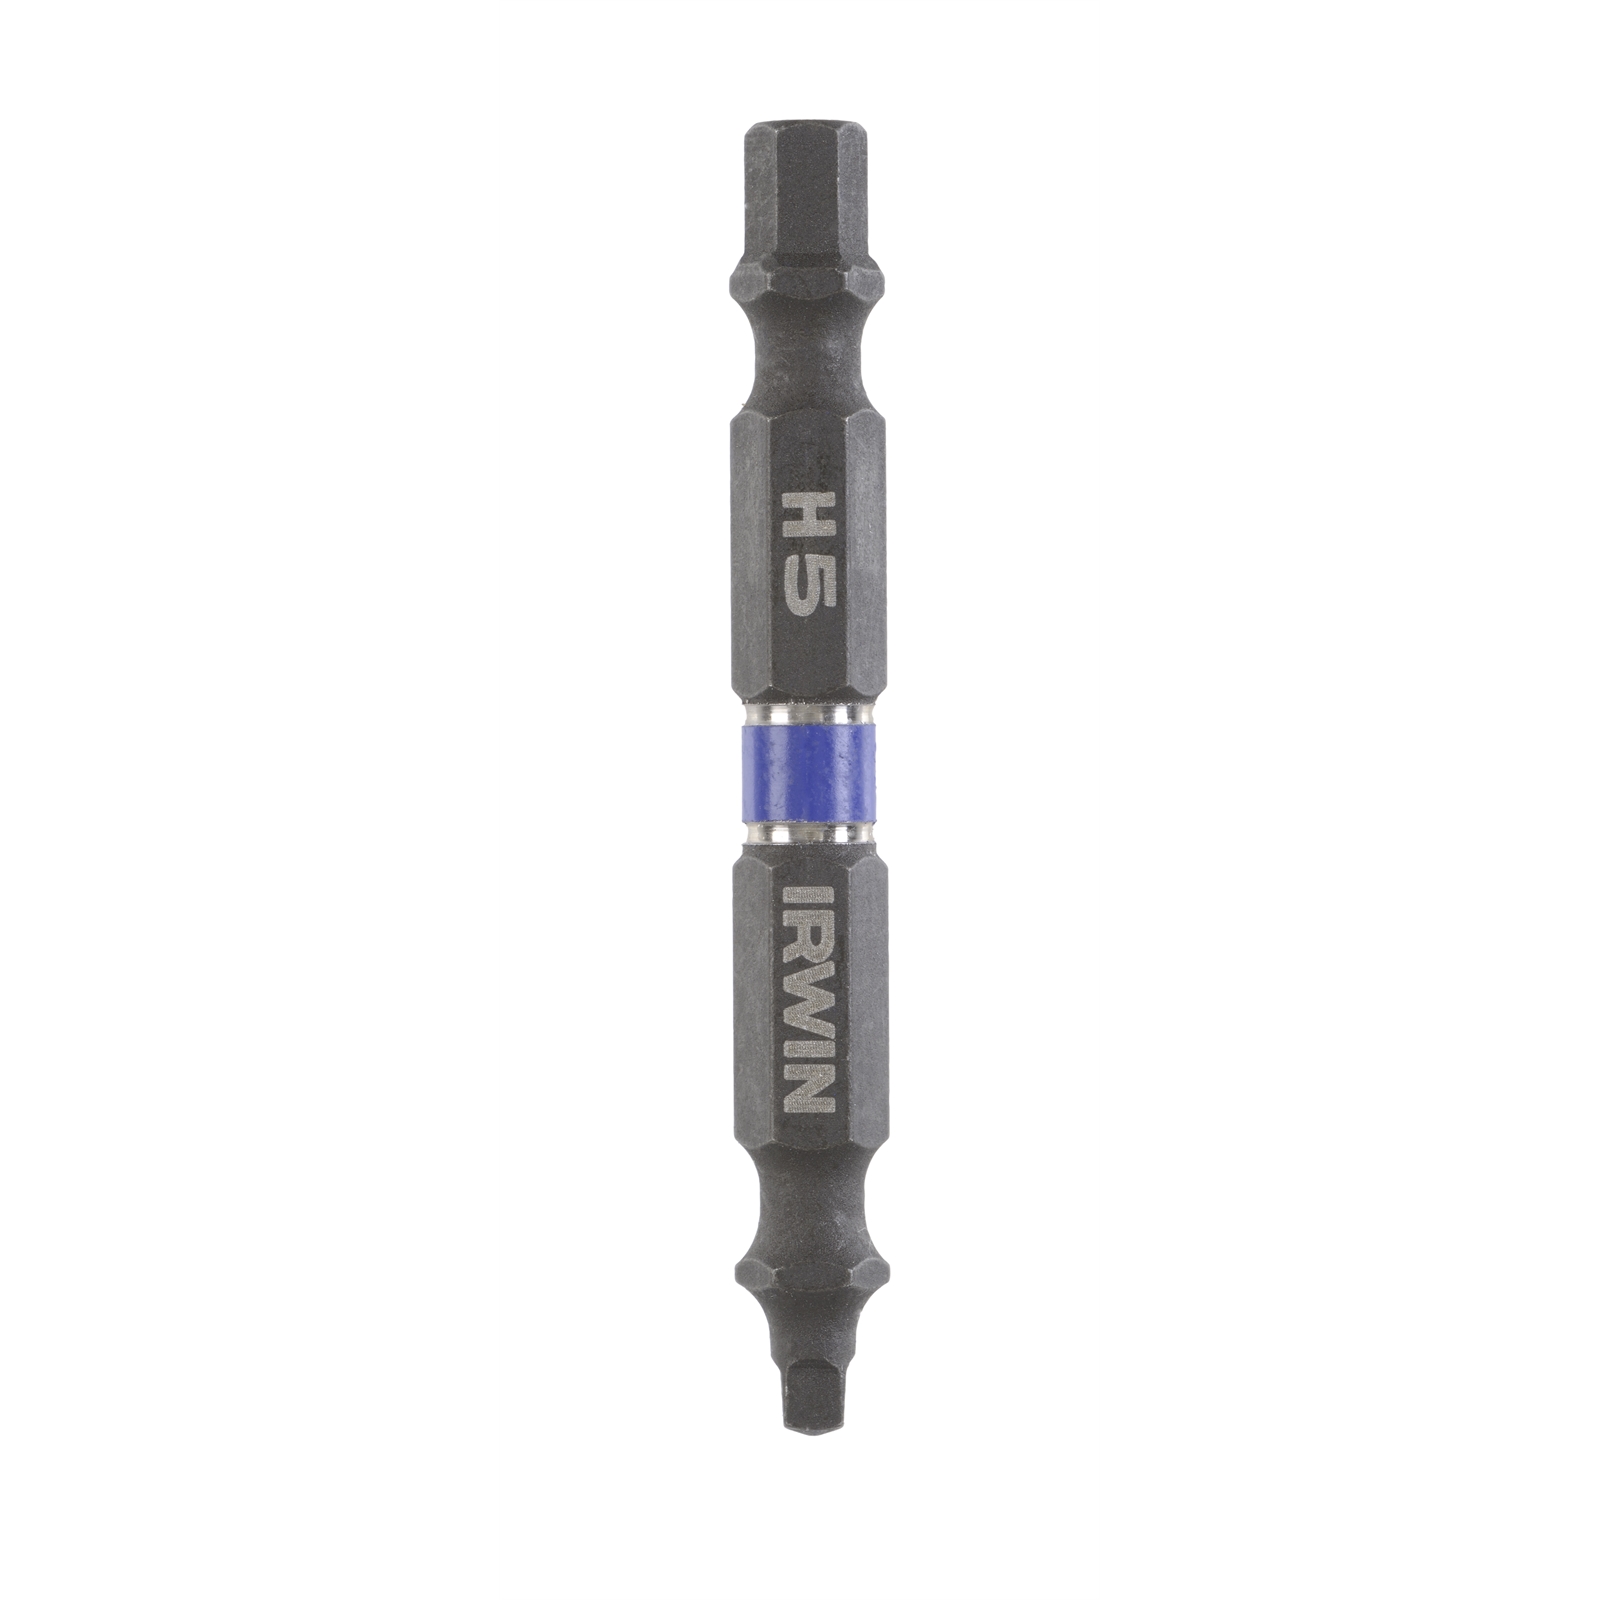 Irwin 5 x 60mm Hex Impact Double Ended Screwdriver Bit